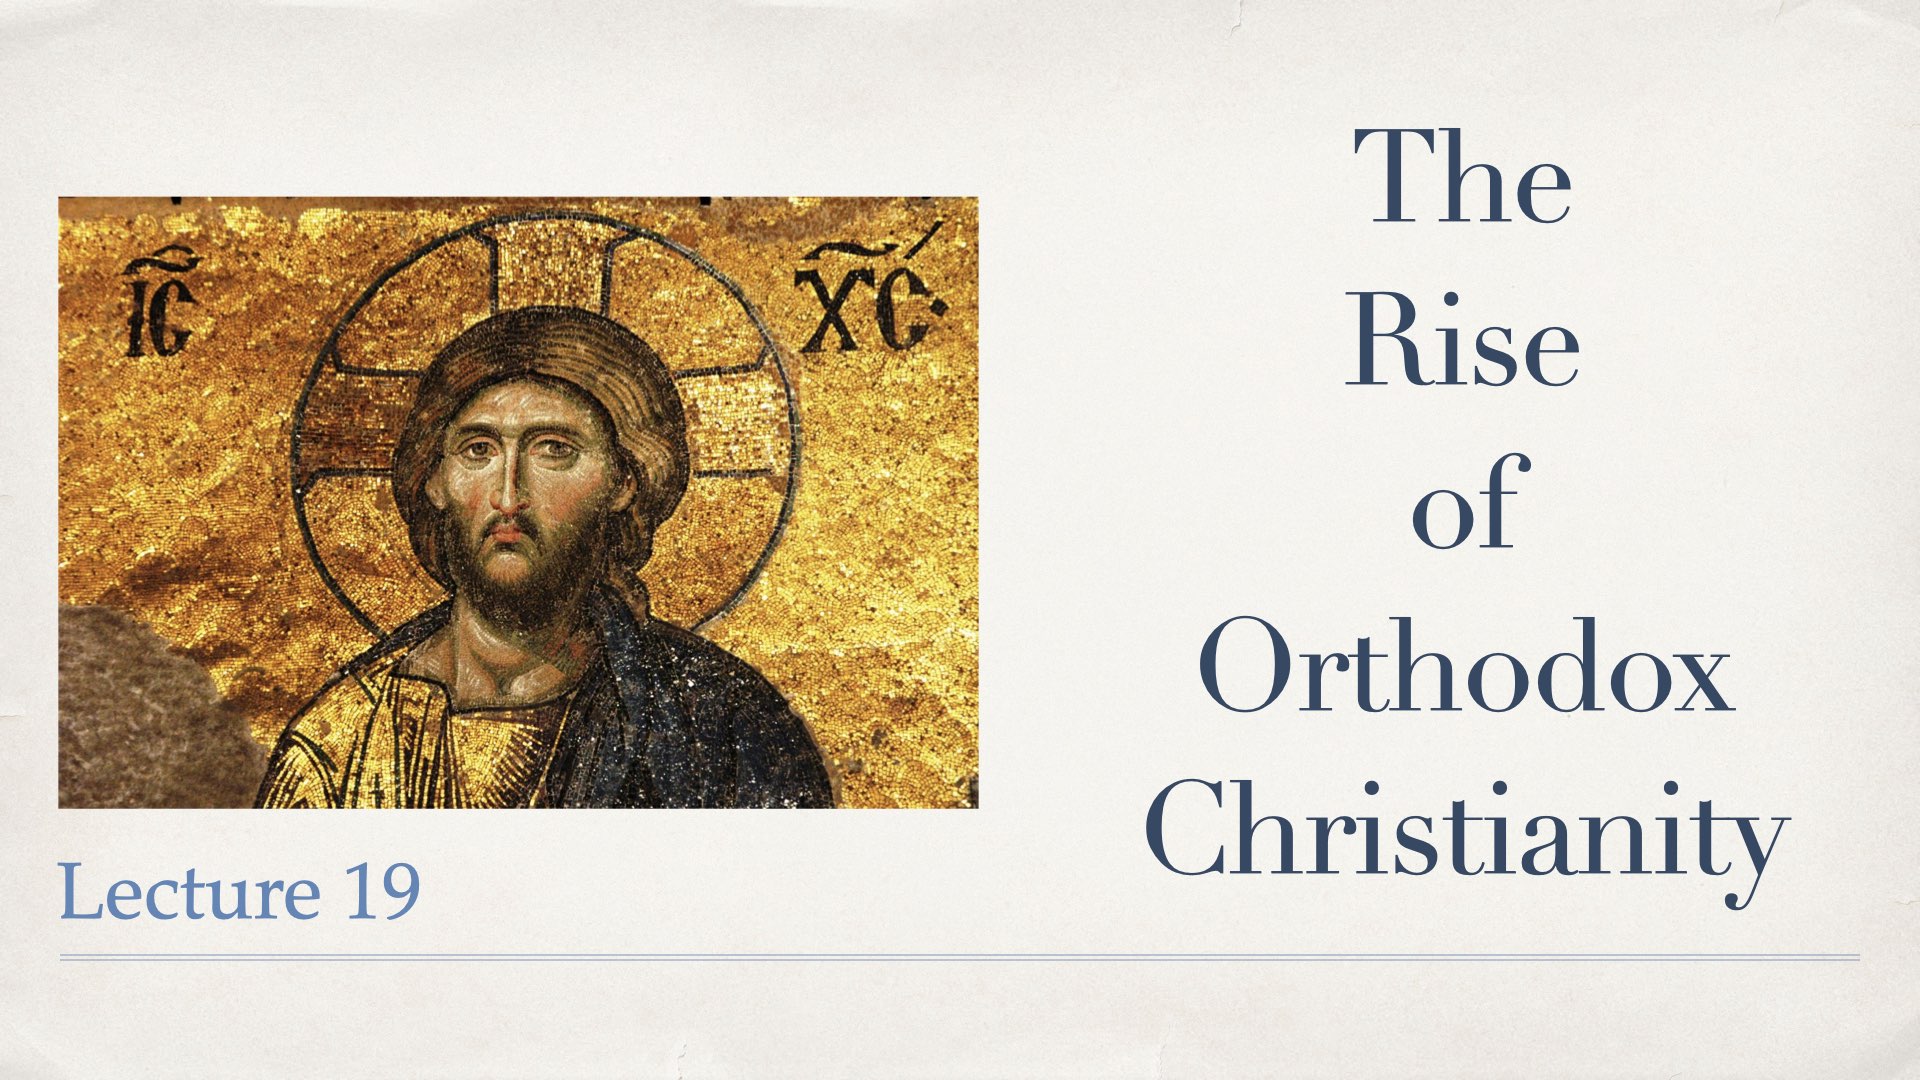 The Rise of Early Christian orthodoxy - Lecture 19